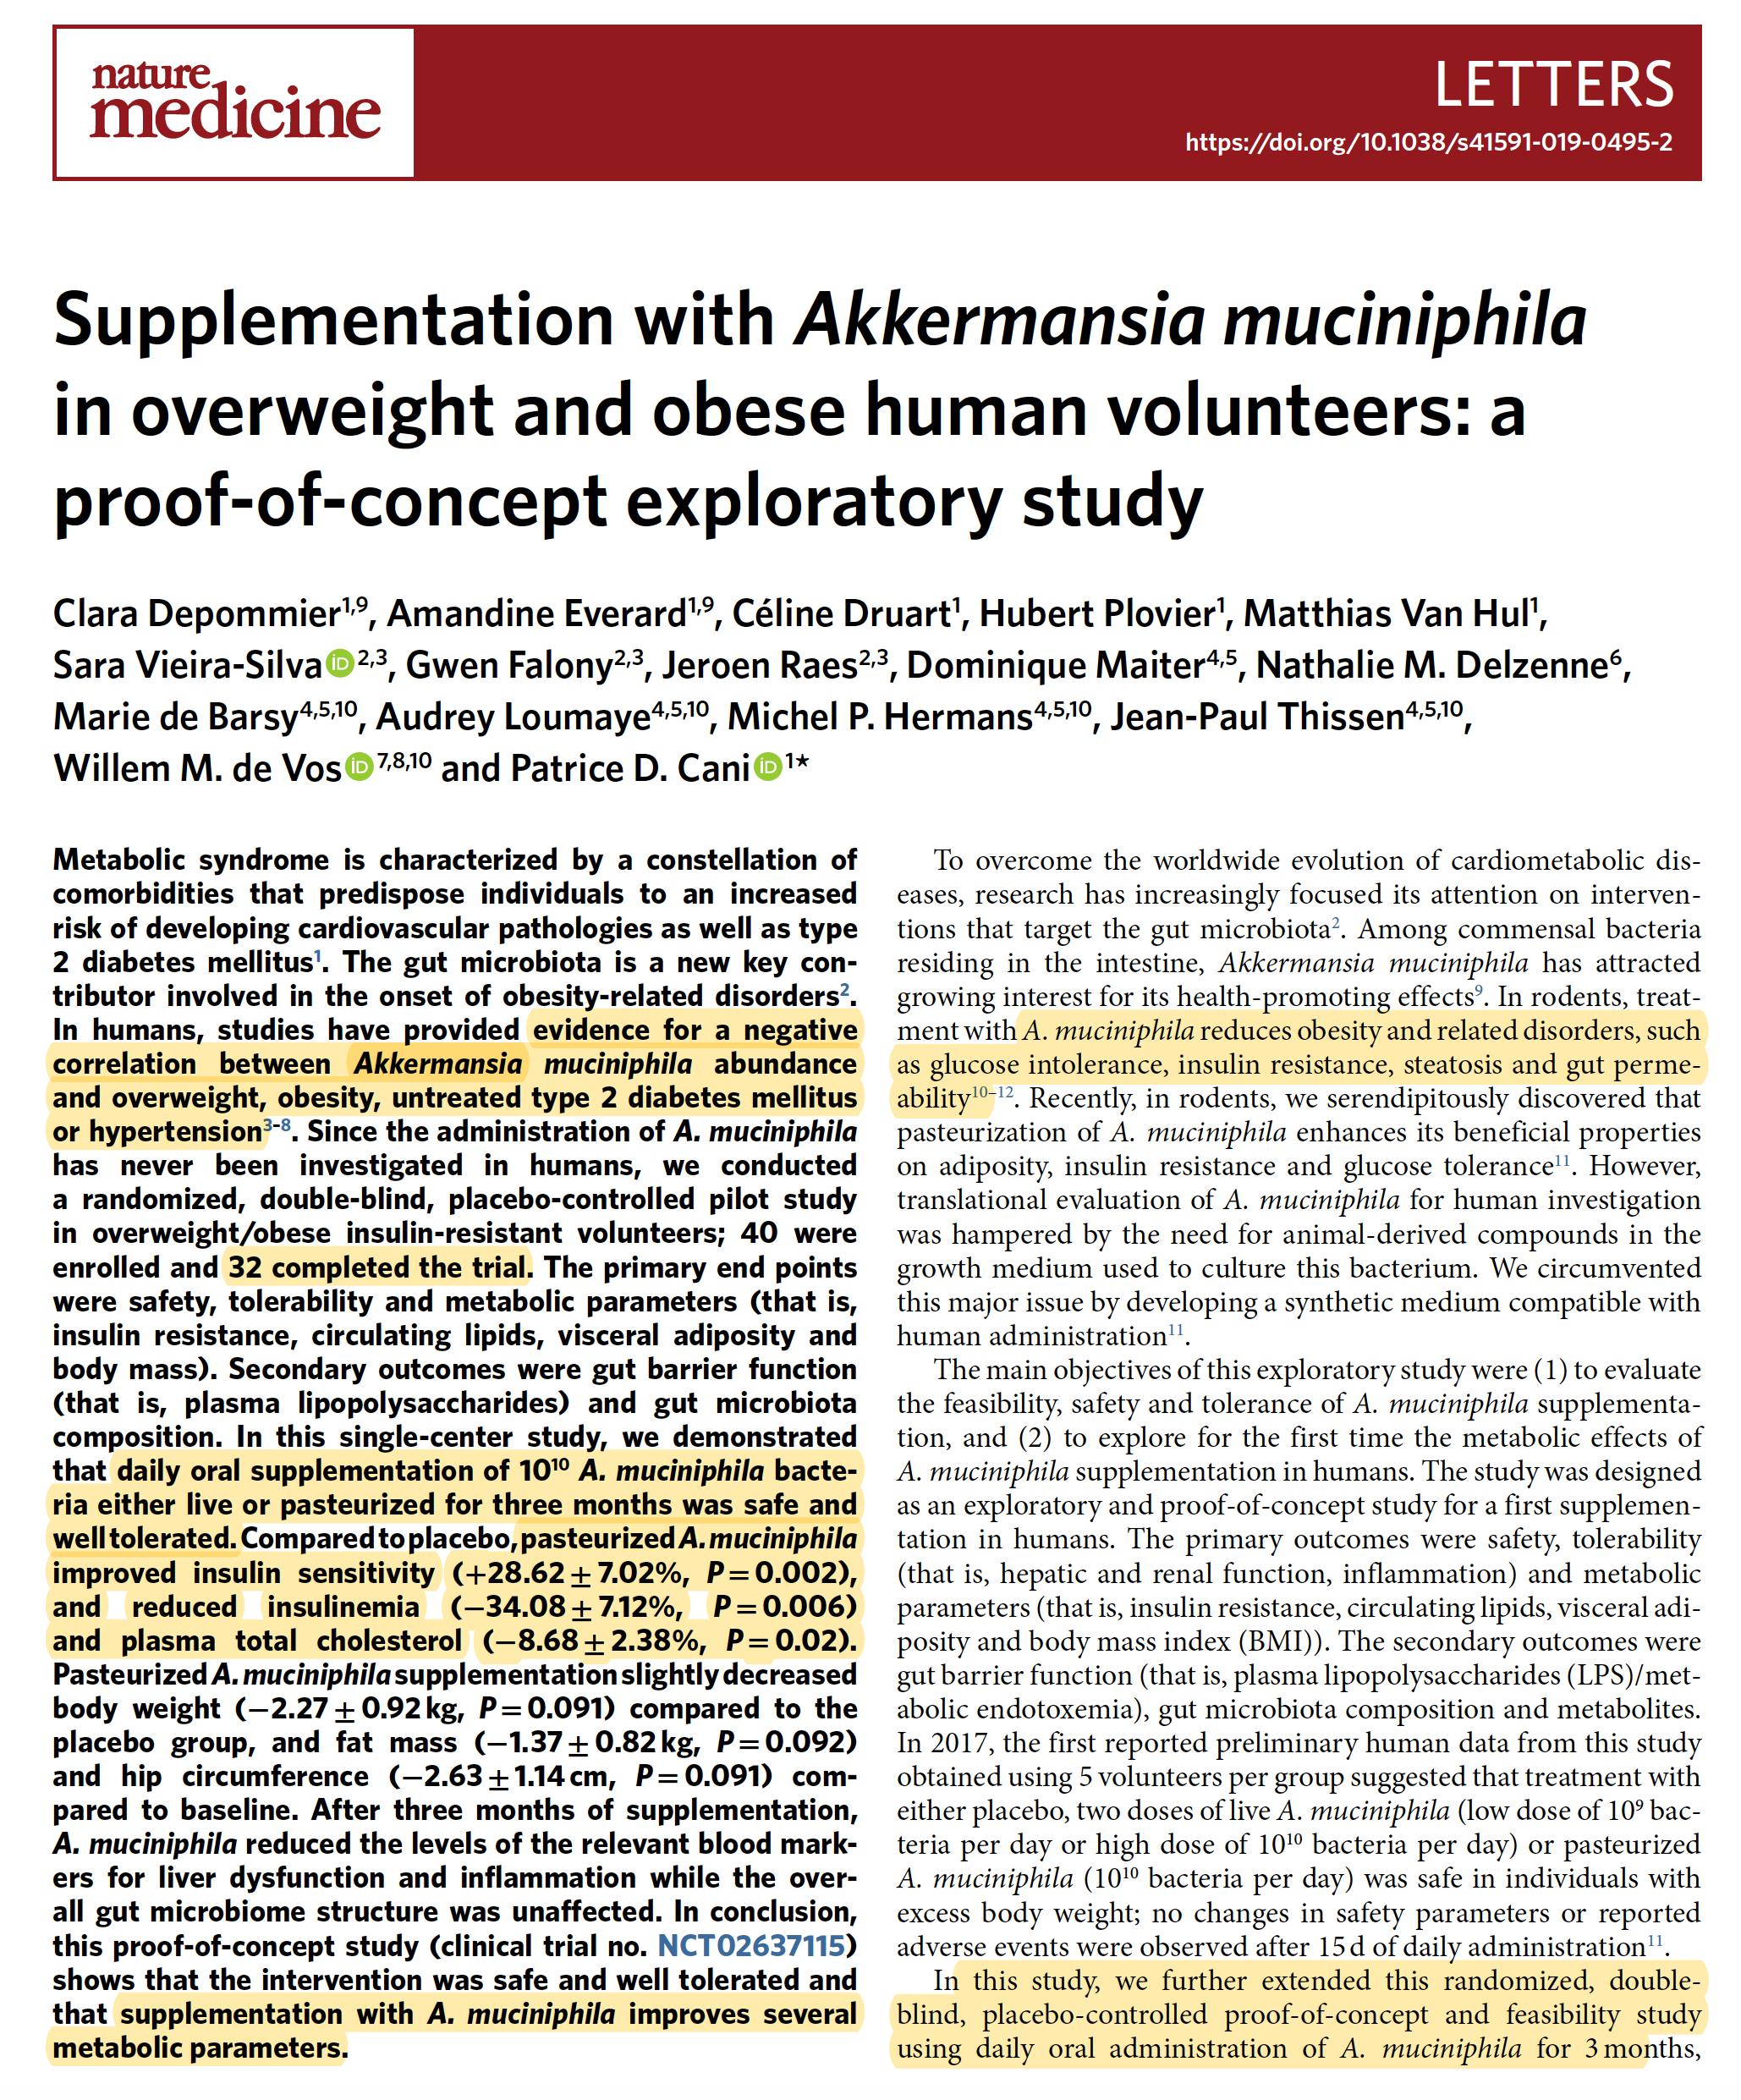 ægteskab hjælpe Udover Eric Topol on Twitter: "Manipulating the gut #microbiome in #obesity: a  randomized, double-blind trial of a bacteria supplement in 32 people  improves insulin sensitivity and cholesterol @NatureMedicine by  @MicrObesity and colleagues https://t.co/fGyKj1ztqR